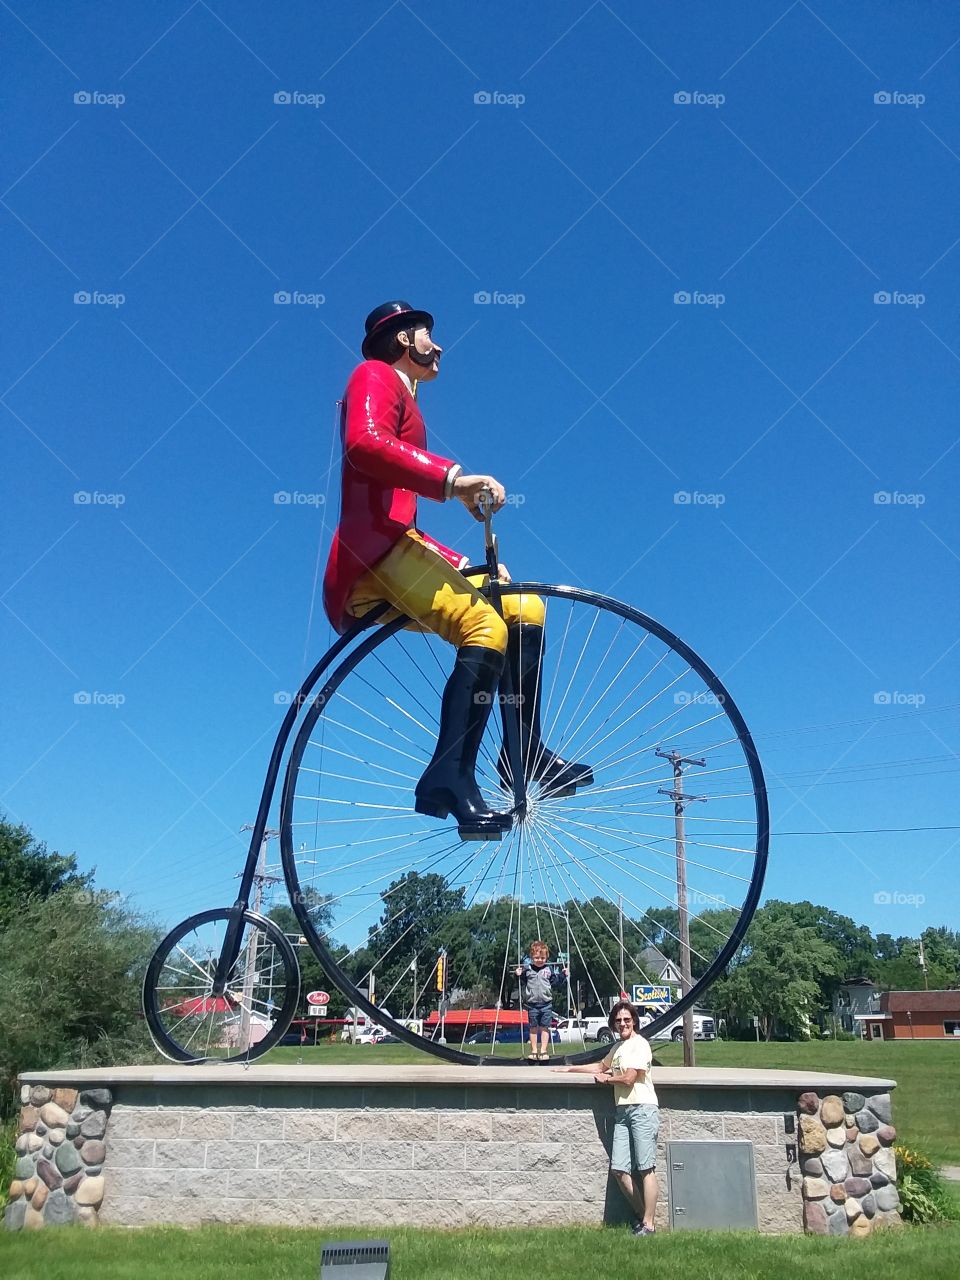 Giant Bicyclist Statue Attraction